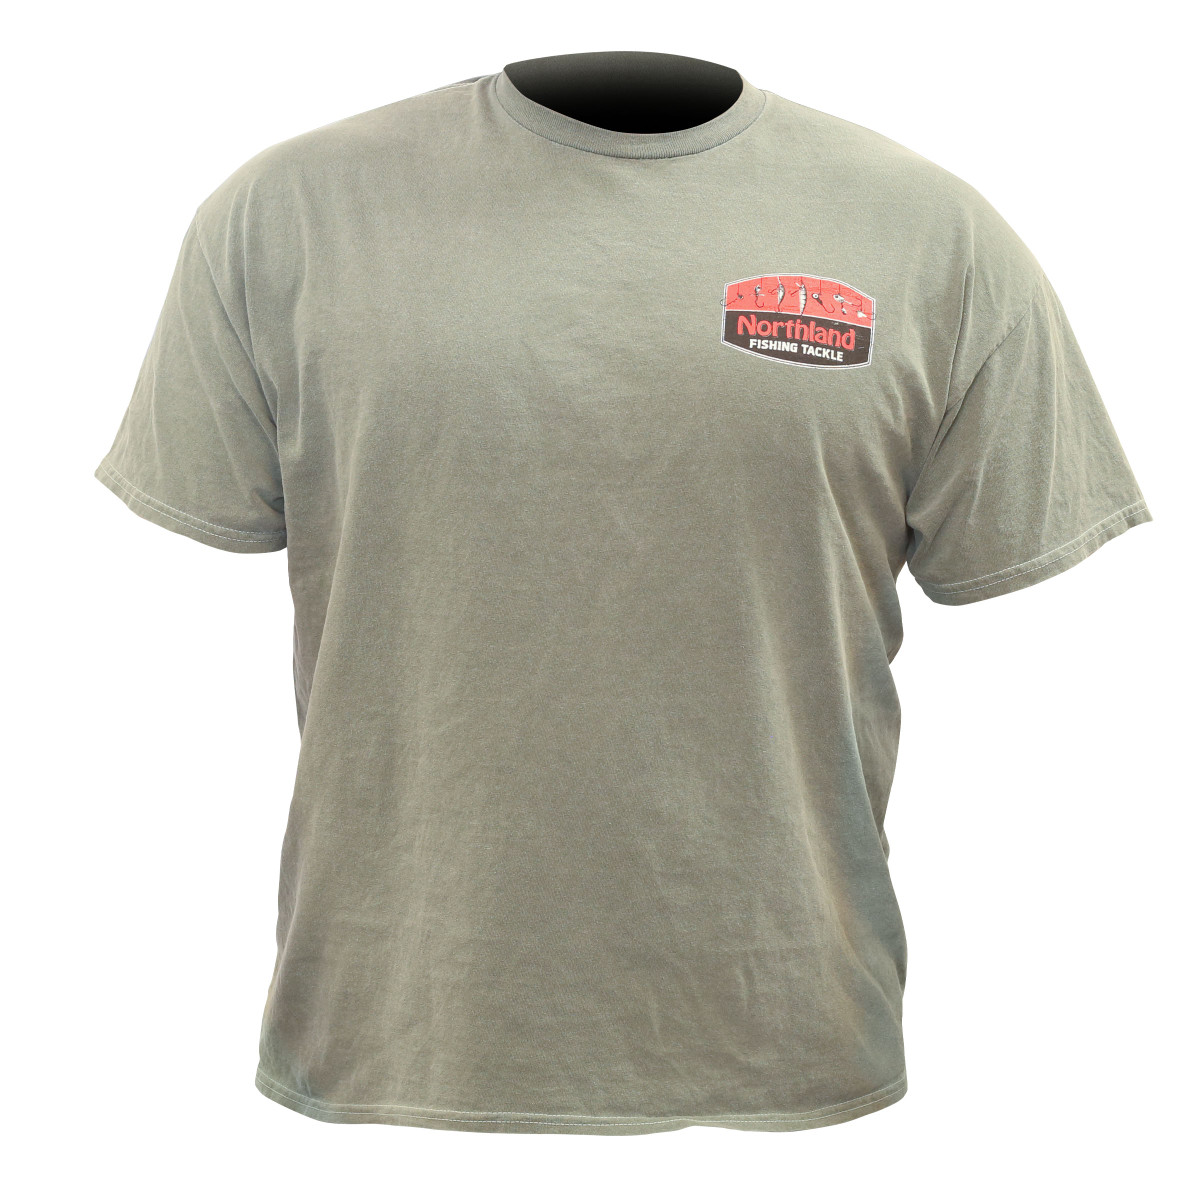 Northland Fishing Tackle Northland Lure T-Shirt Olive - Size - S